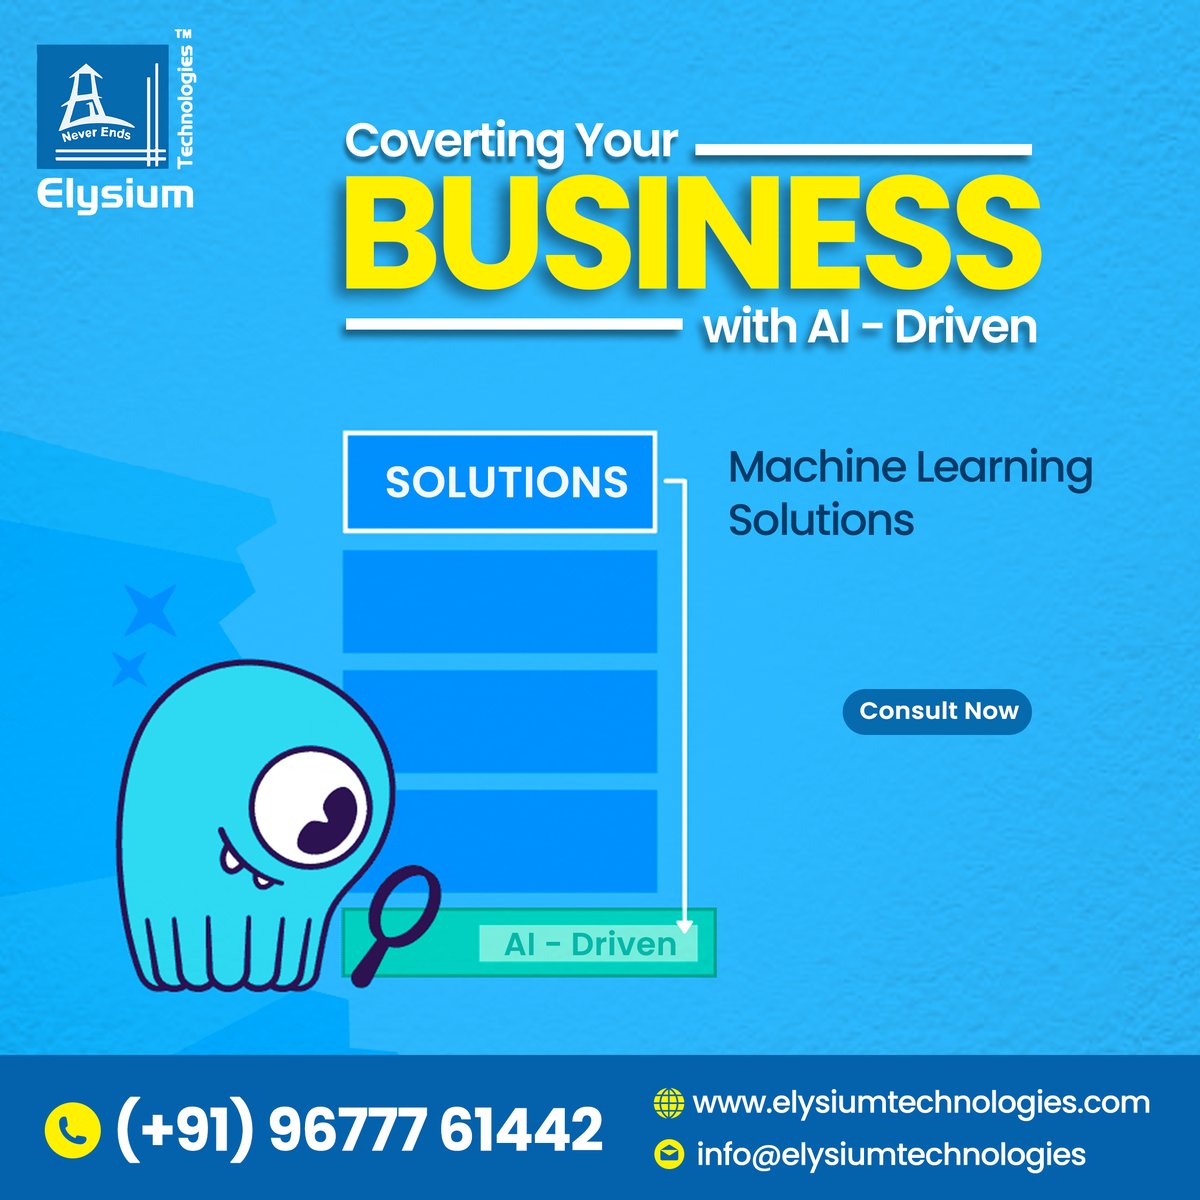 Converting Your Business With AI Driven

#elysiumtechnologies #ETPL #datascienceconsultation #ConsultingServices #datascienceagency #datainsights #datasciencecompany #datainsights